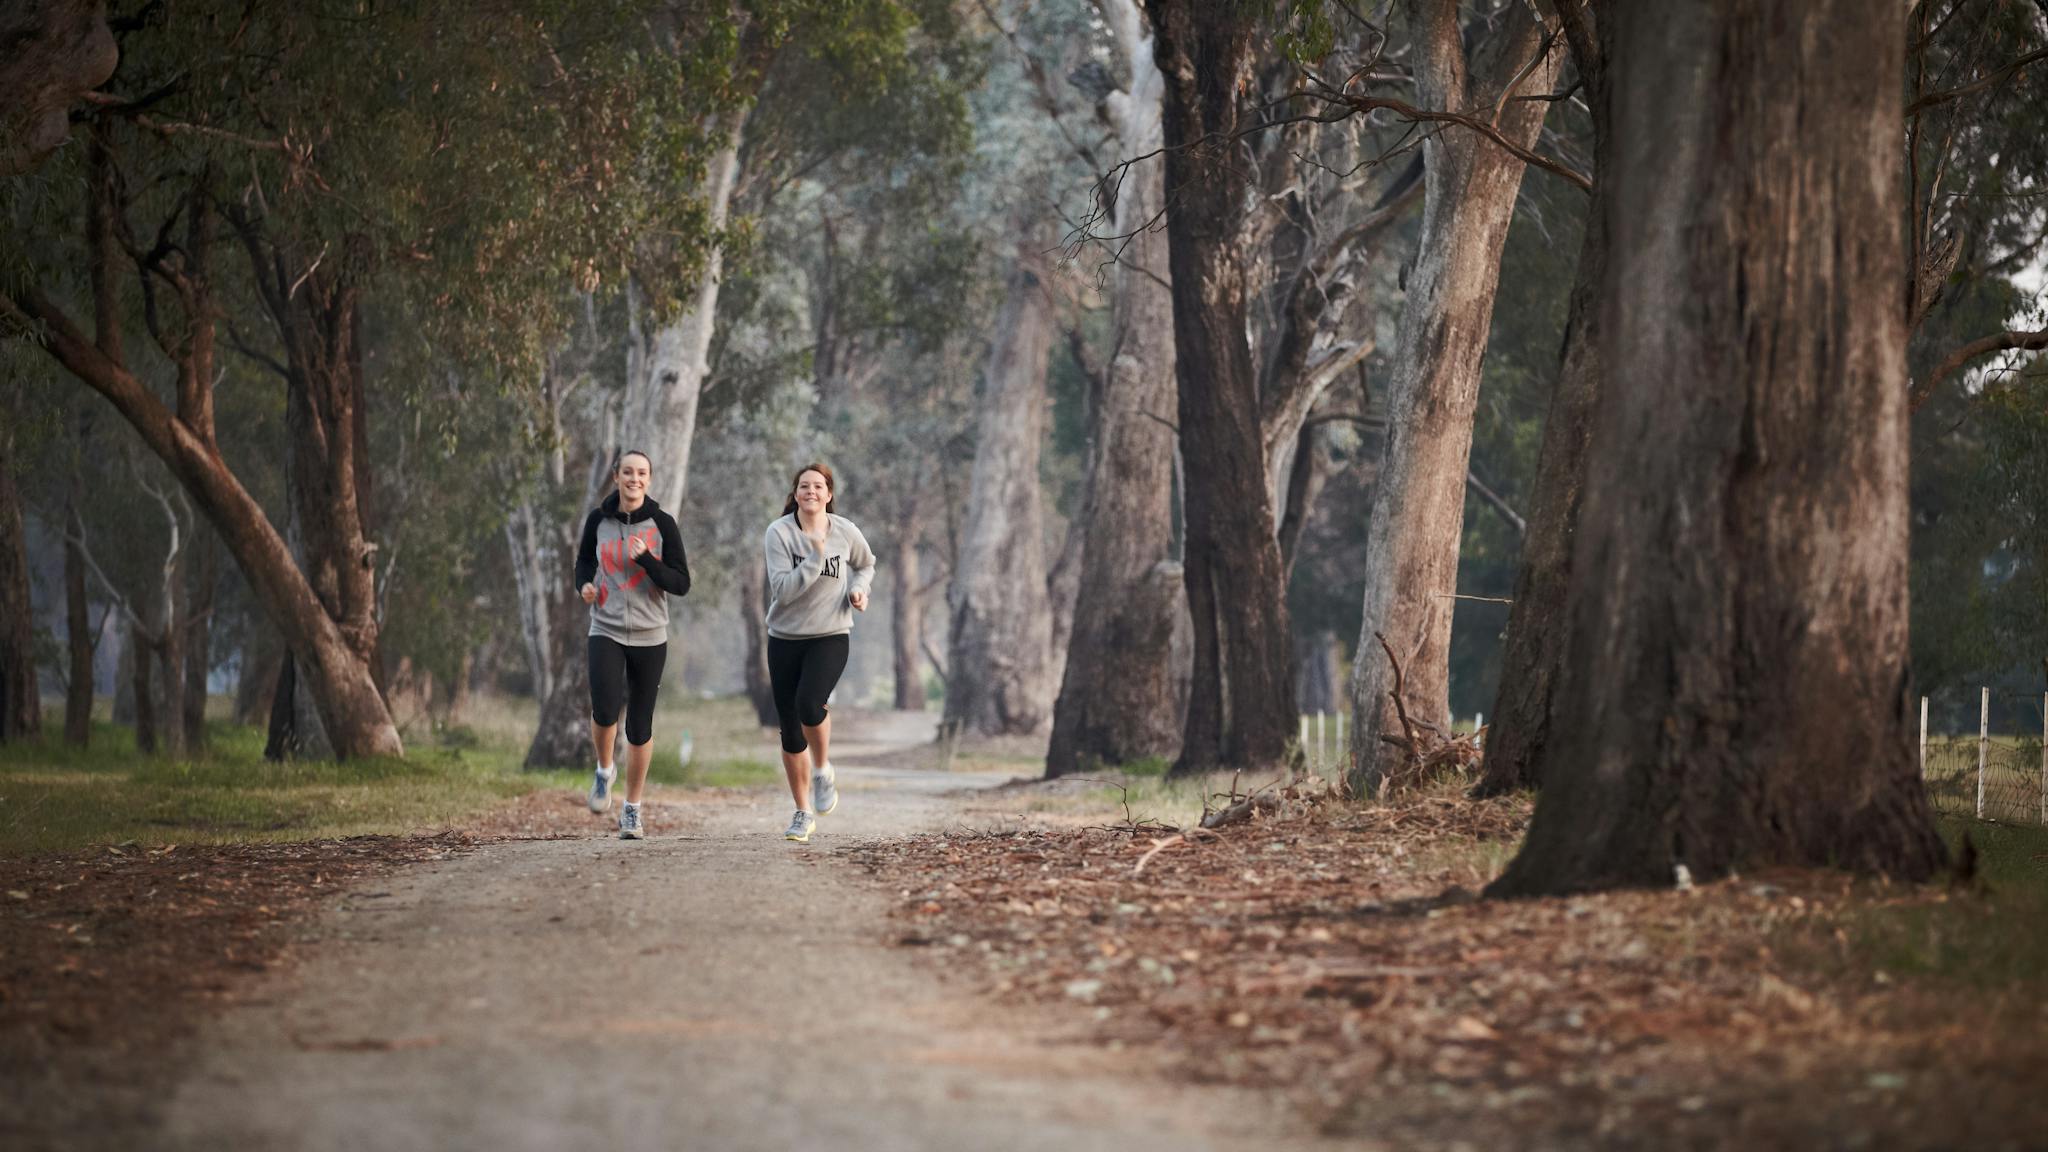 Two people running along track, trees, foggy morning.